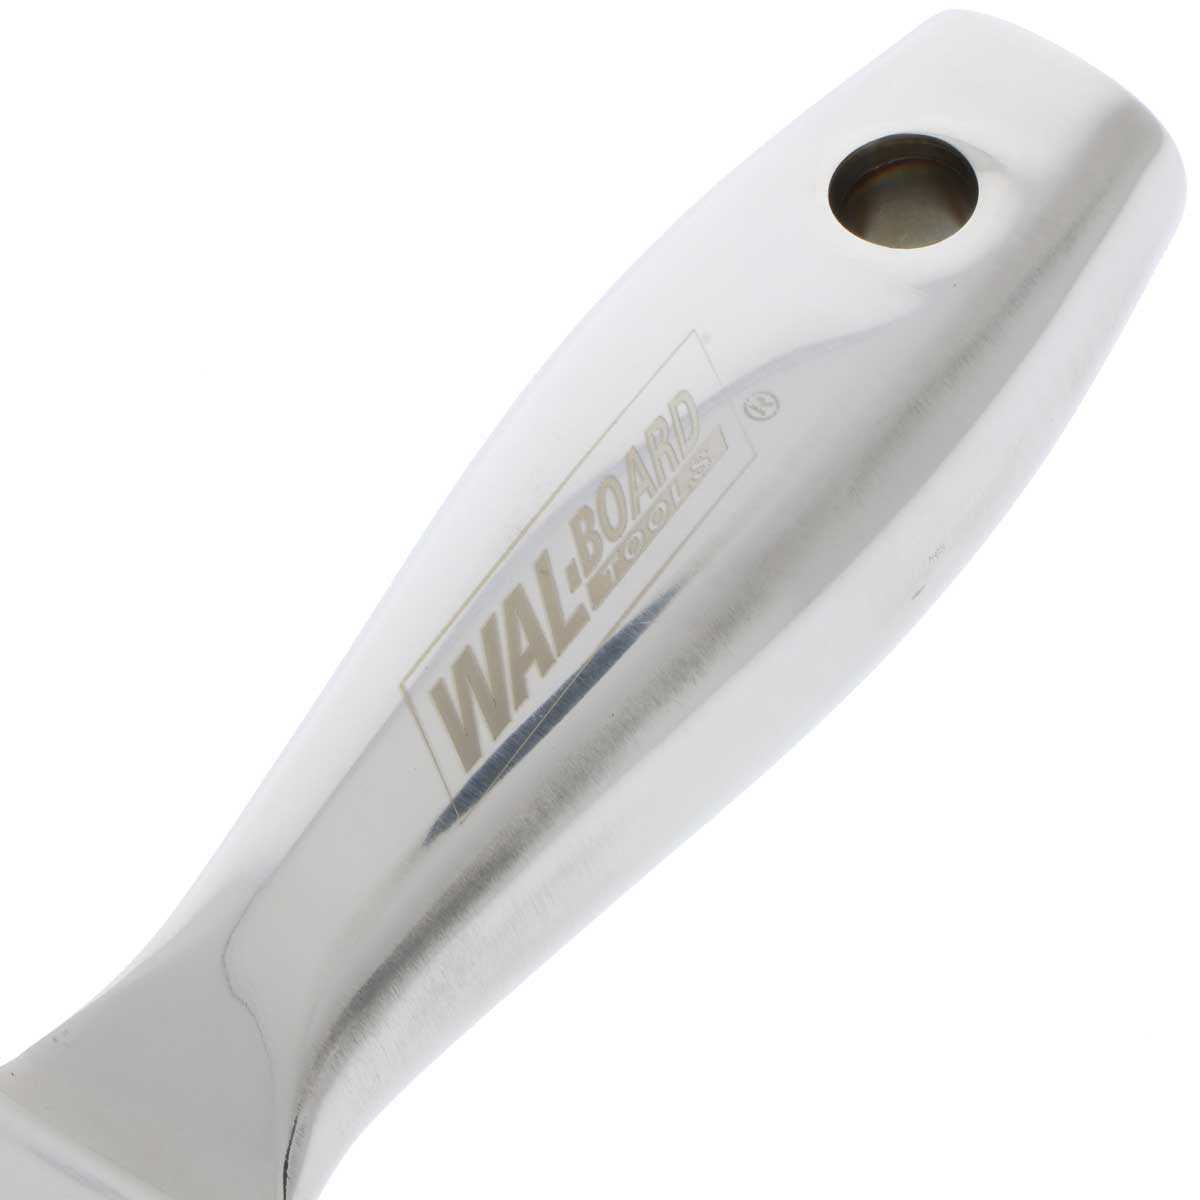 Wal-Board 6" One Piece Joint Knife